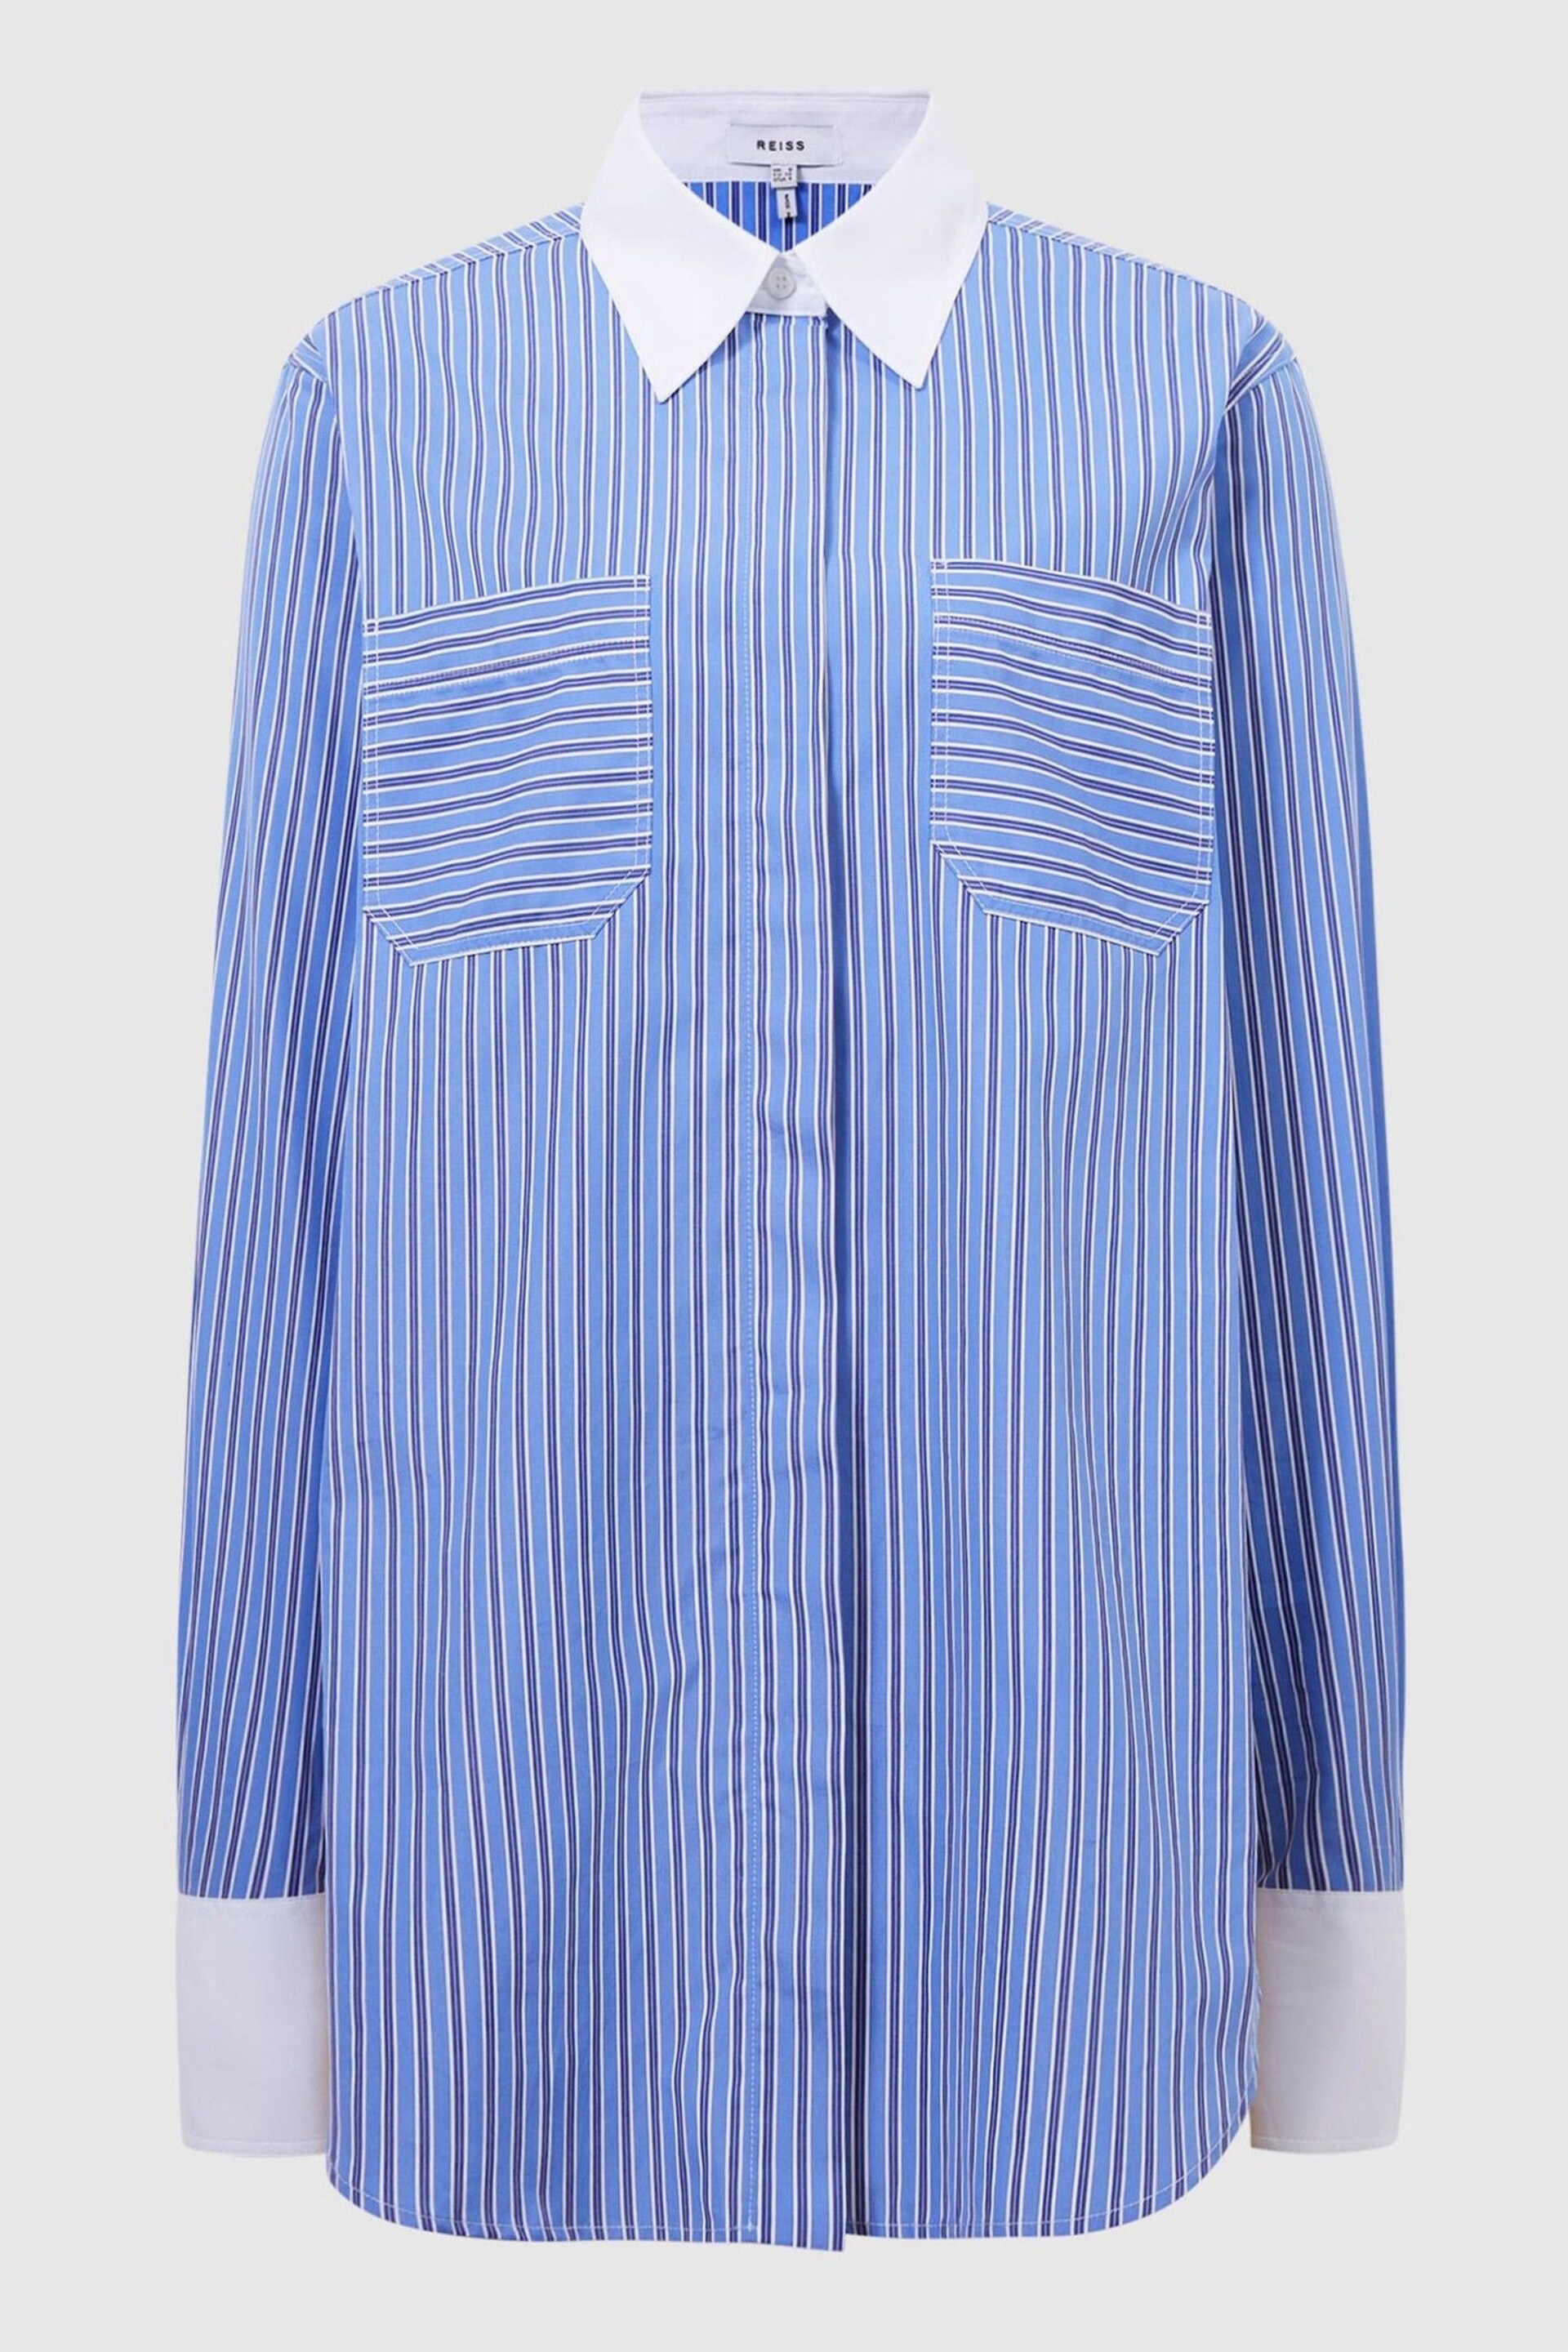 Reiss Blue/White Grace Contrast Stripe Collared Shirt - Image 2 of 6